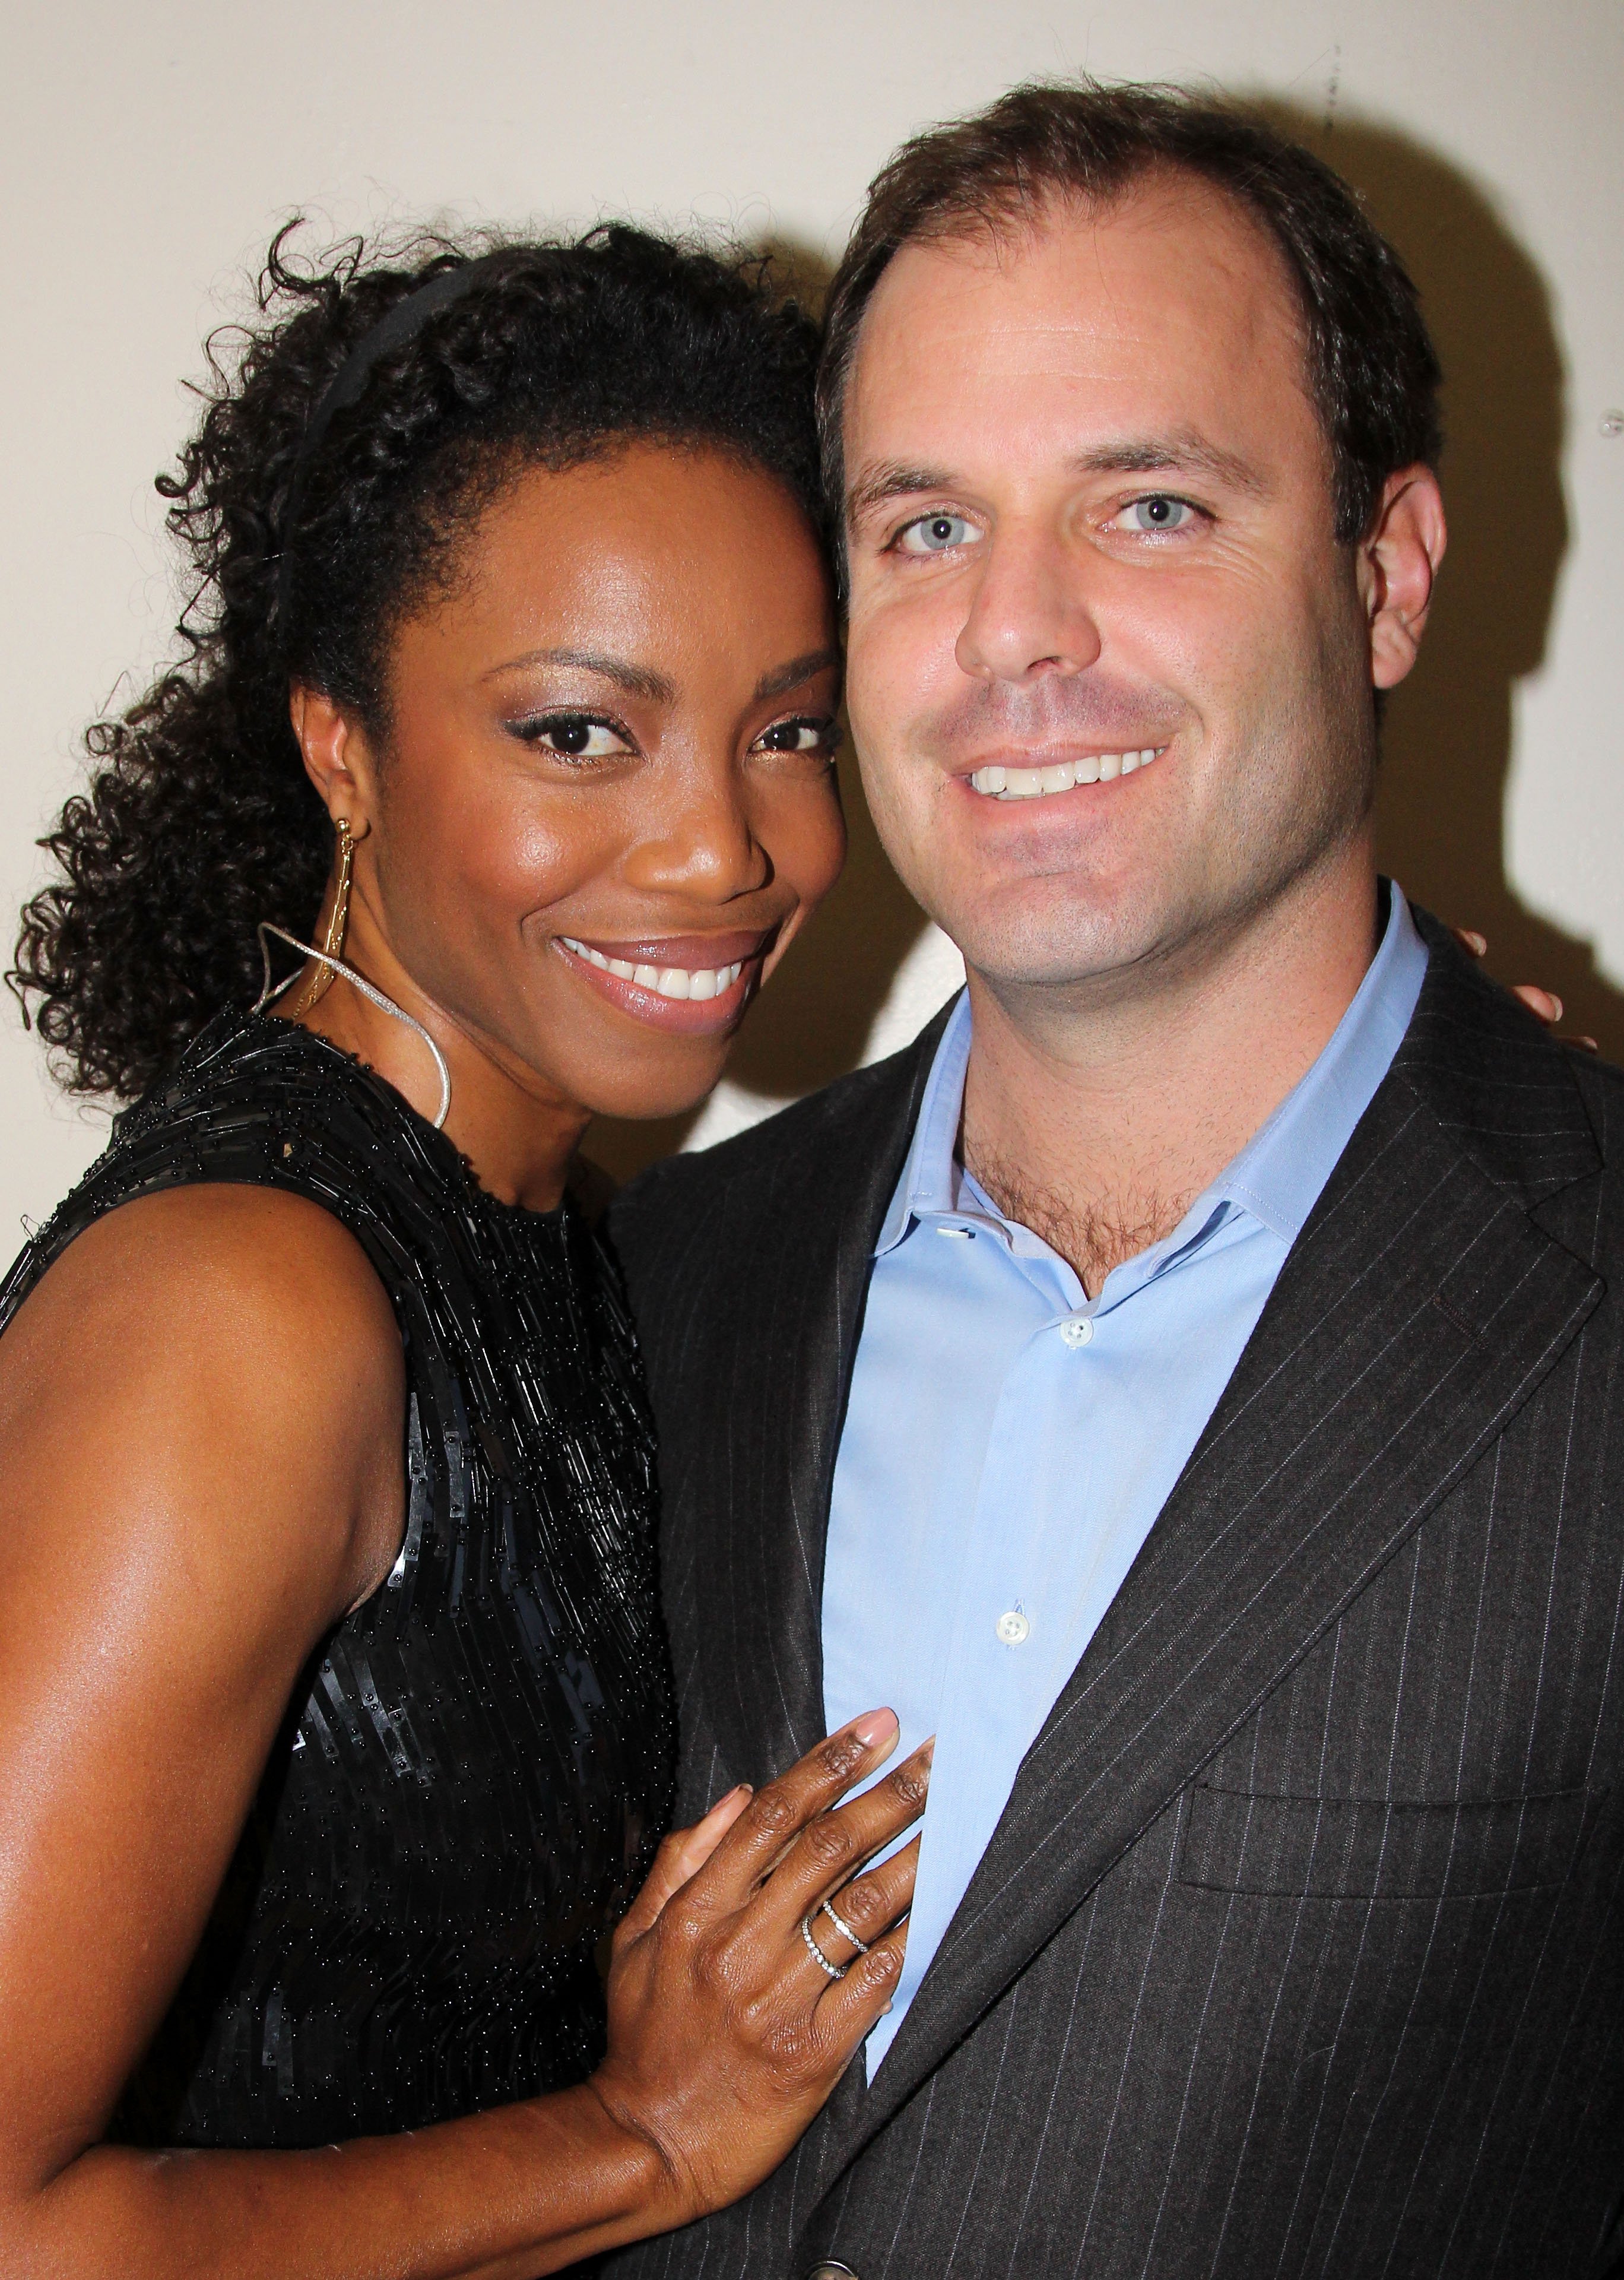 Heather Headley and husband Brian Musso pose backstage at "Il Divo A Musical Affair: The Greatest Songs of Broadway featuring Heather Headley" on Broadway, on November 7, 2013, in New York City.  | Source: Getty Images